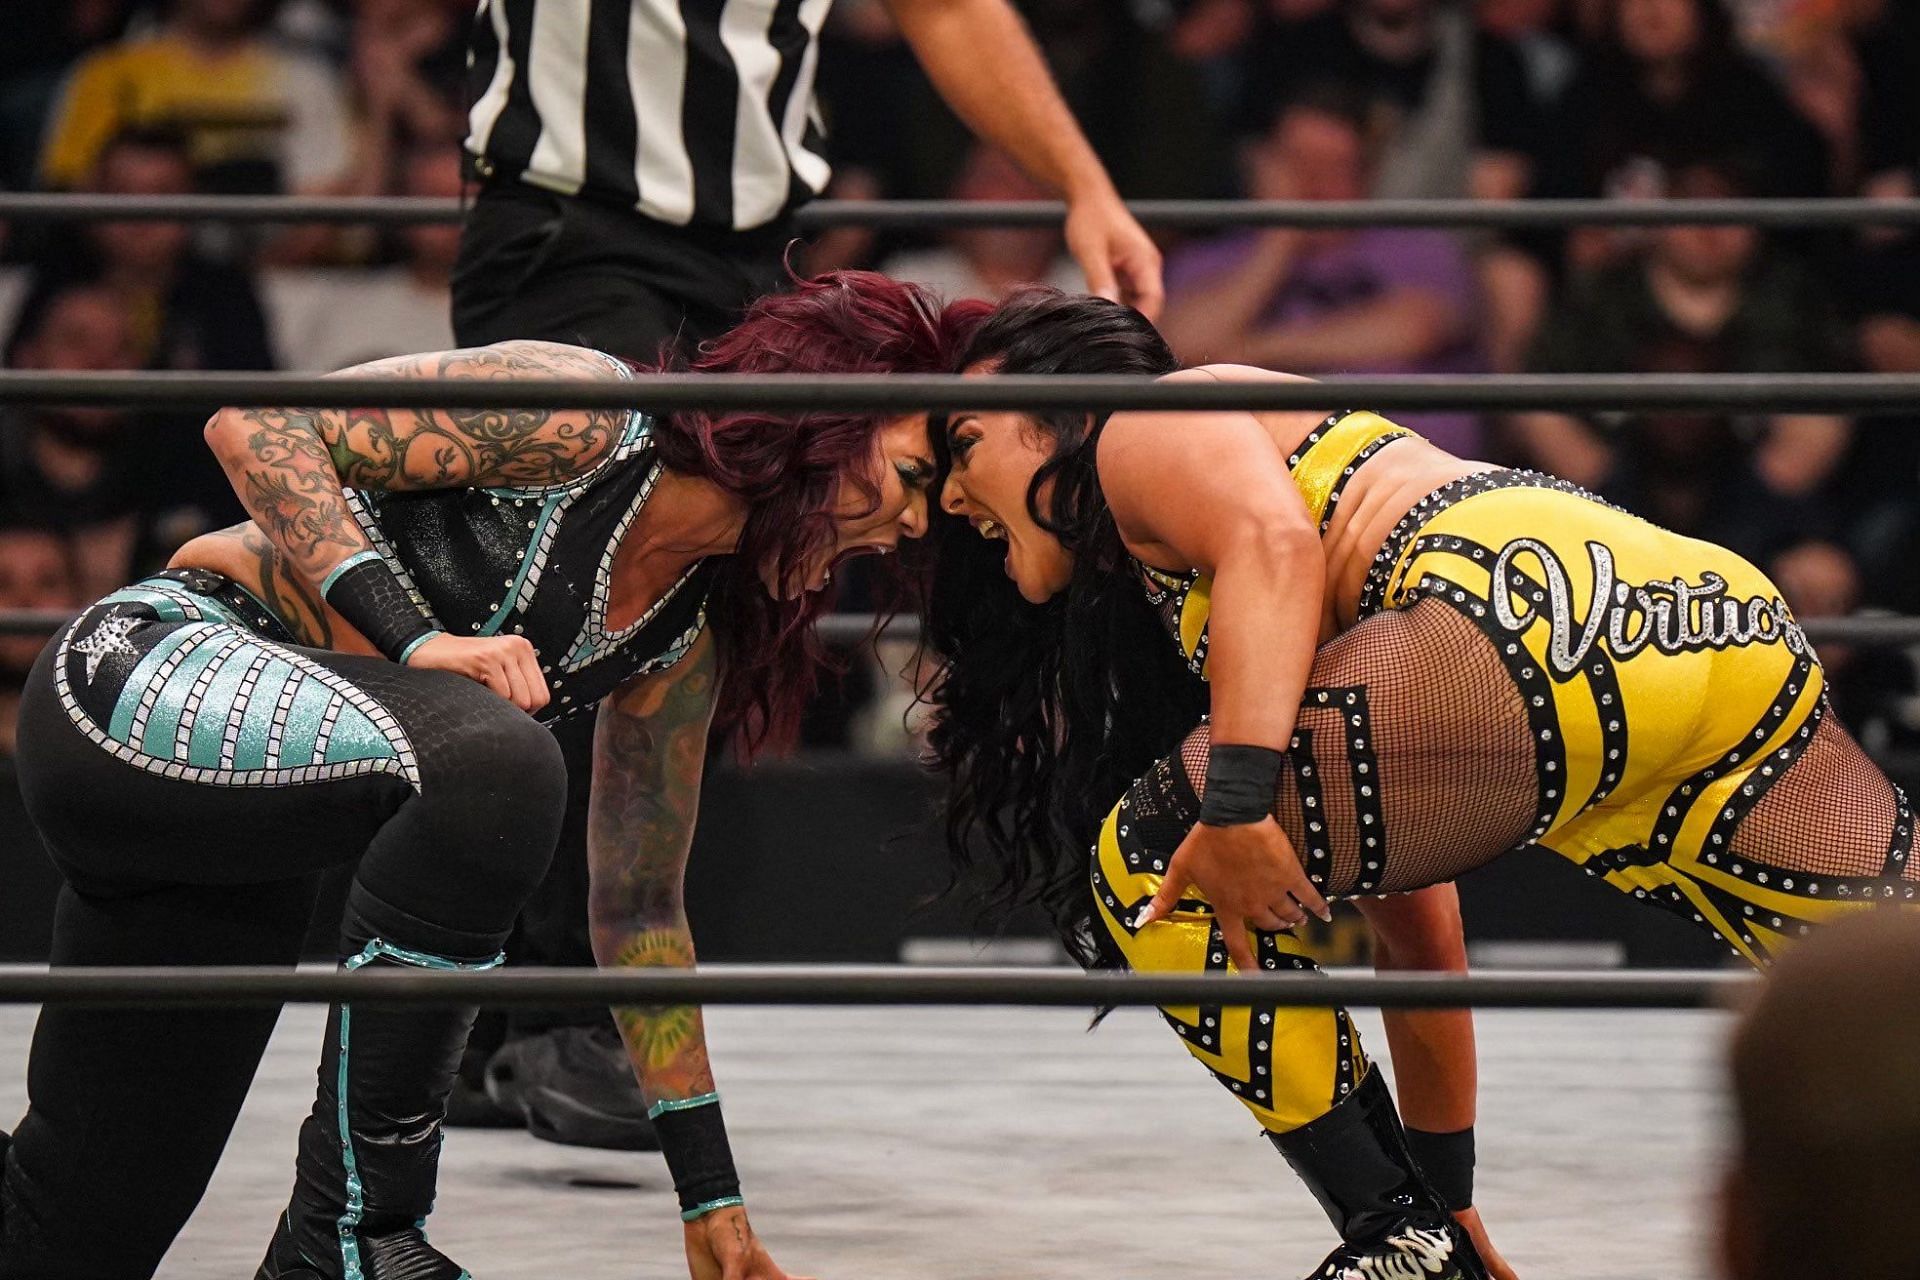 The two women headlined AEW Dynamite this week!